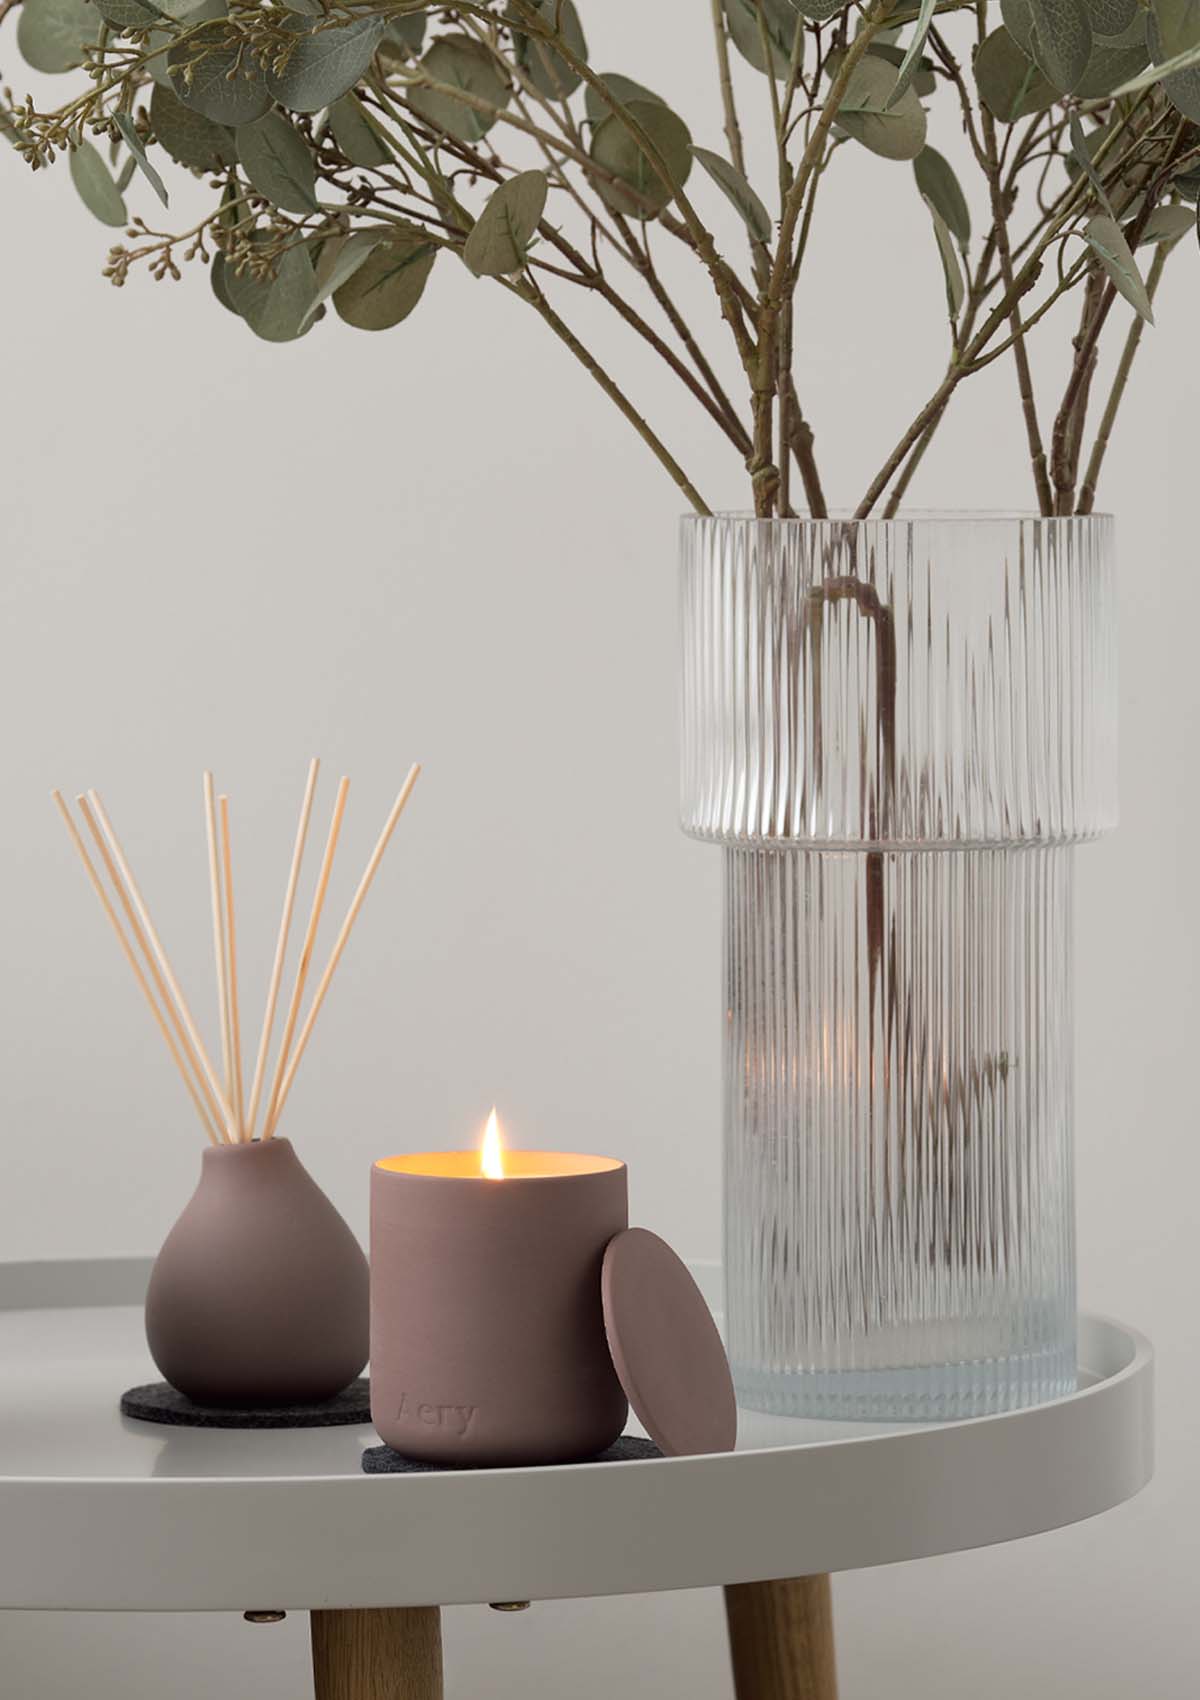 Aubergine Moroccan Rose Diffuser by Aery displayed next to Moroccan Rose candle on grey table 